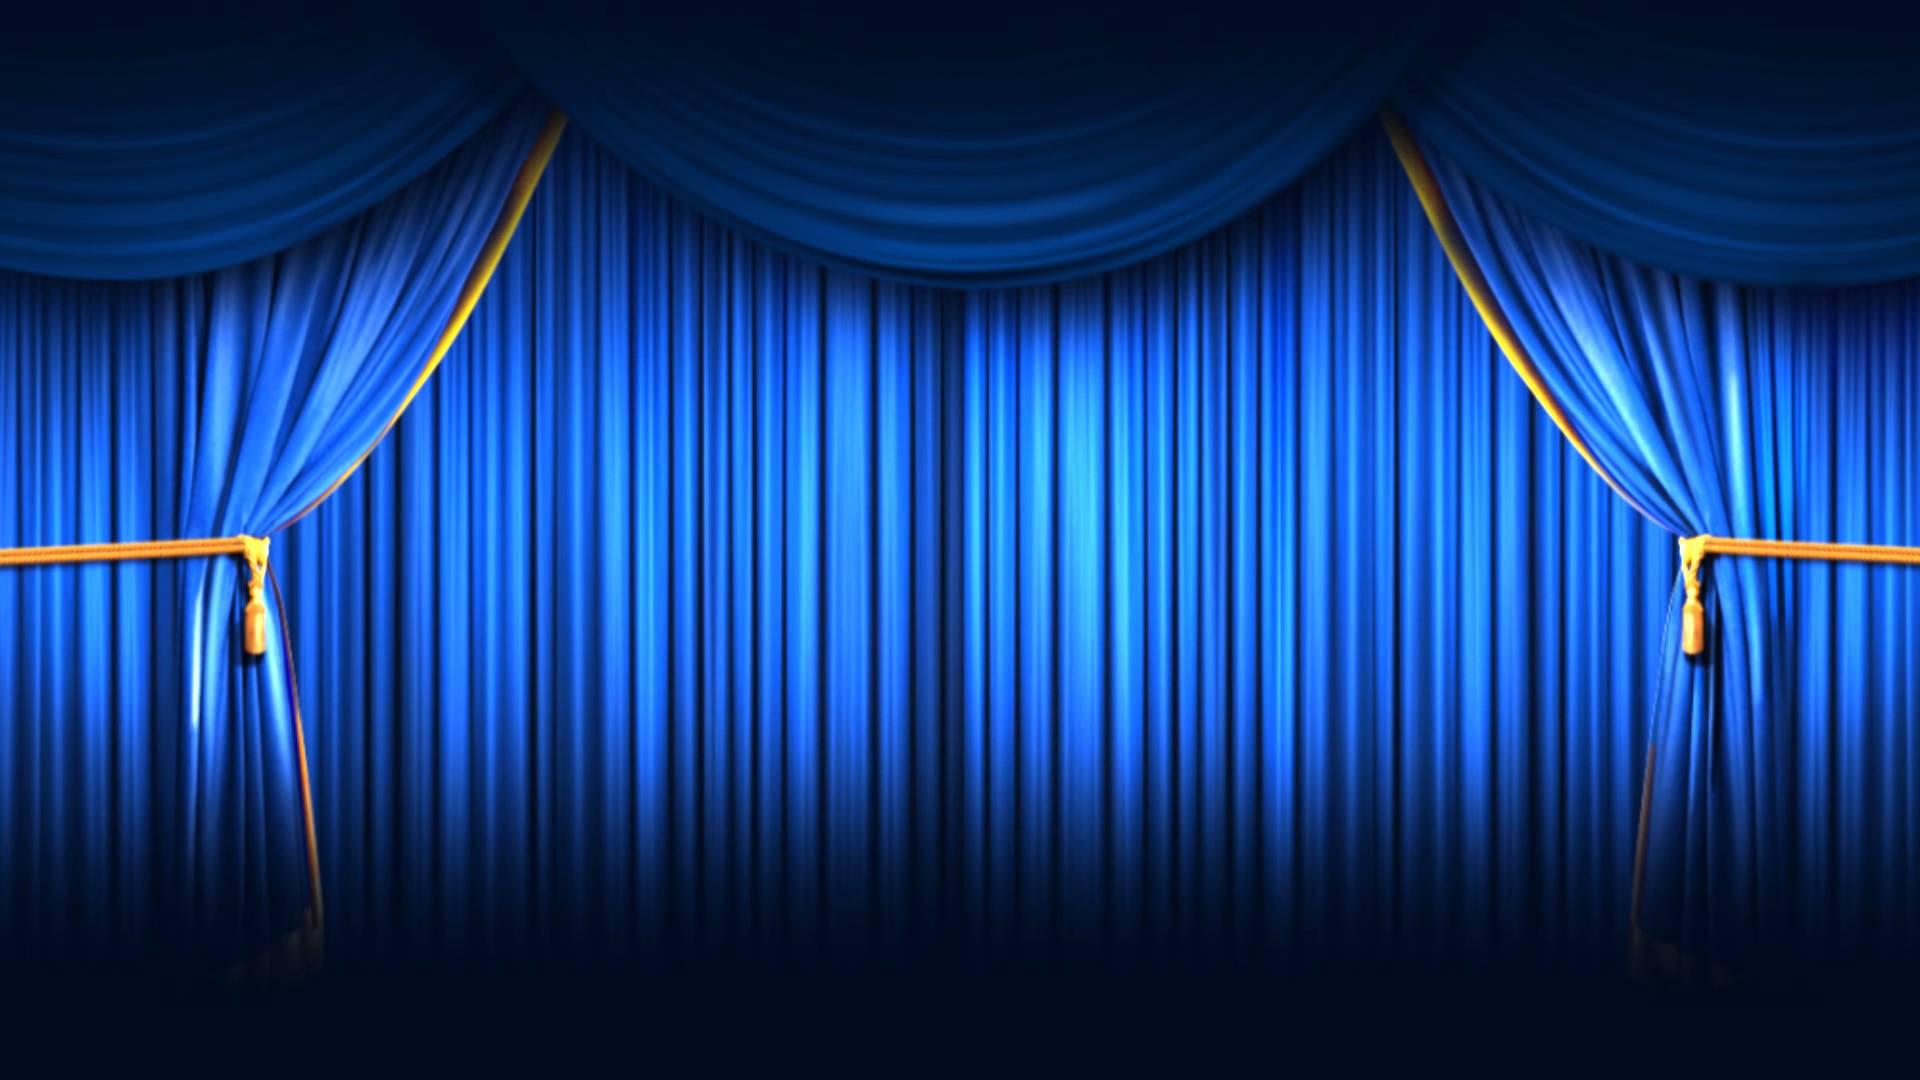 Curtain Background Pictures  Download Free Images on Unsplash